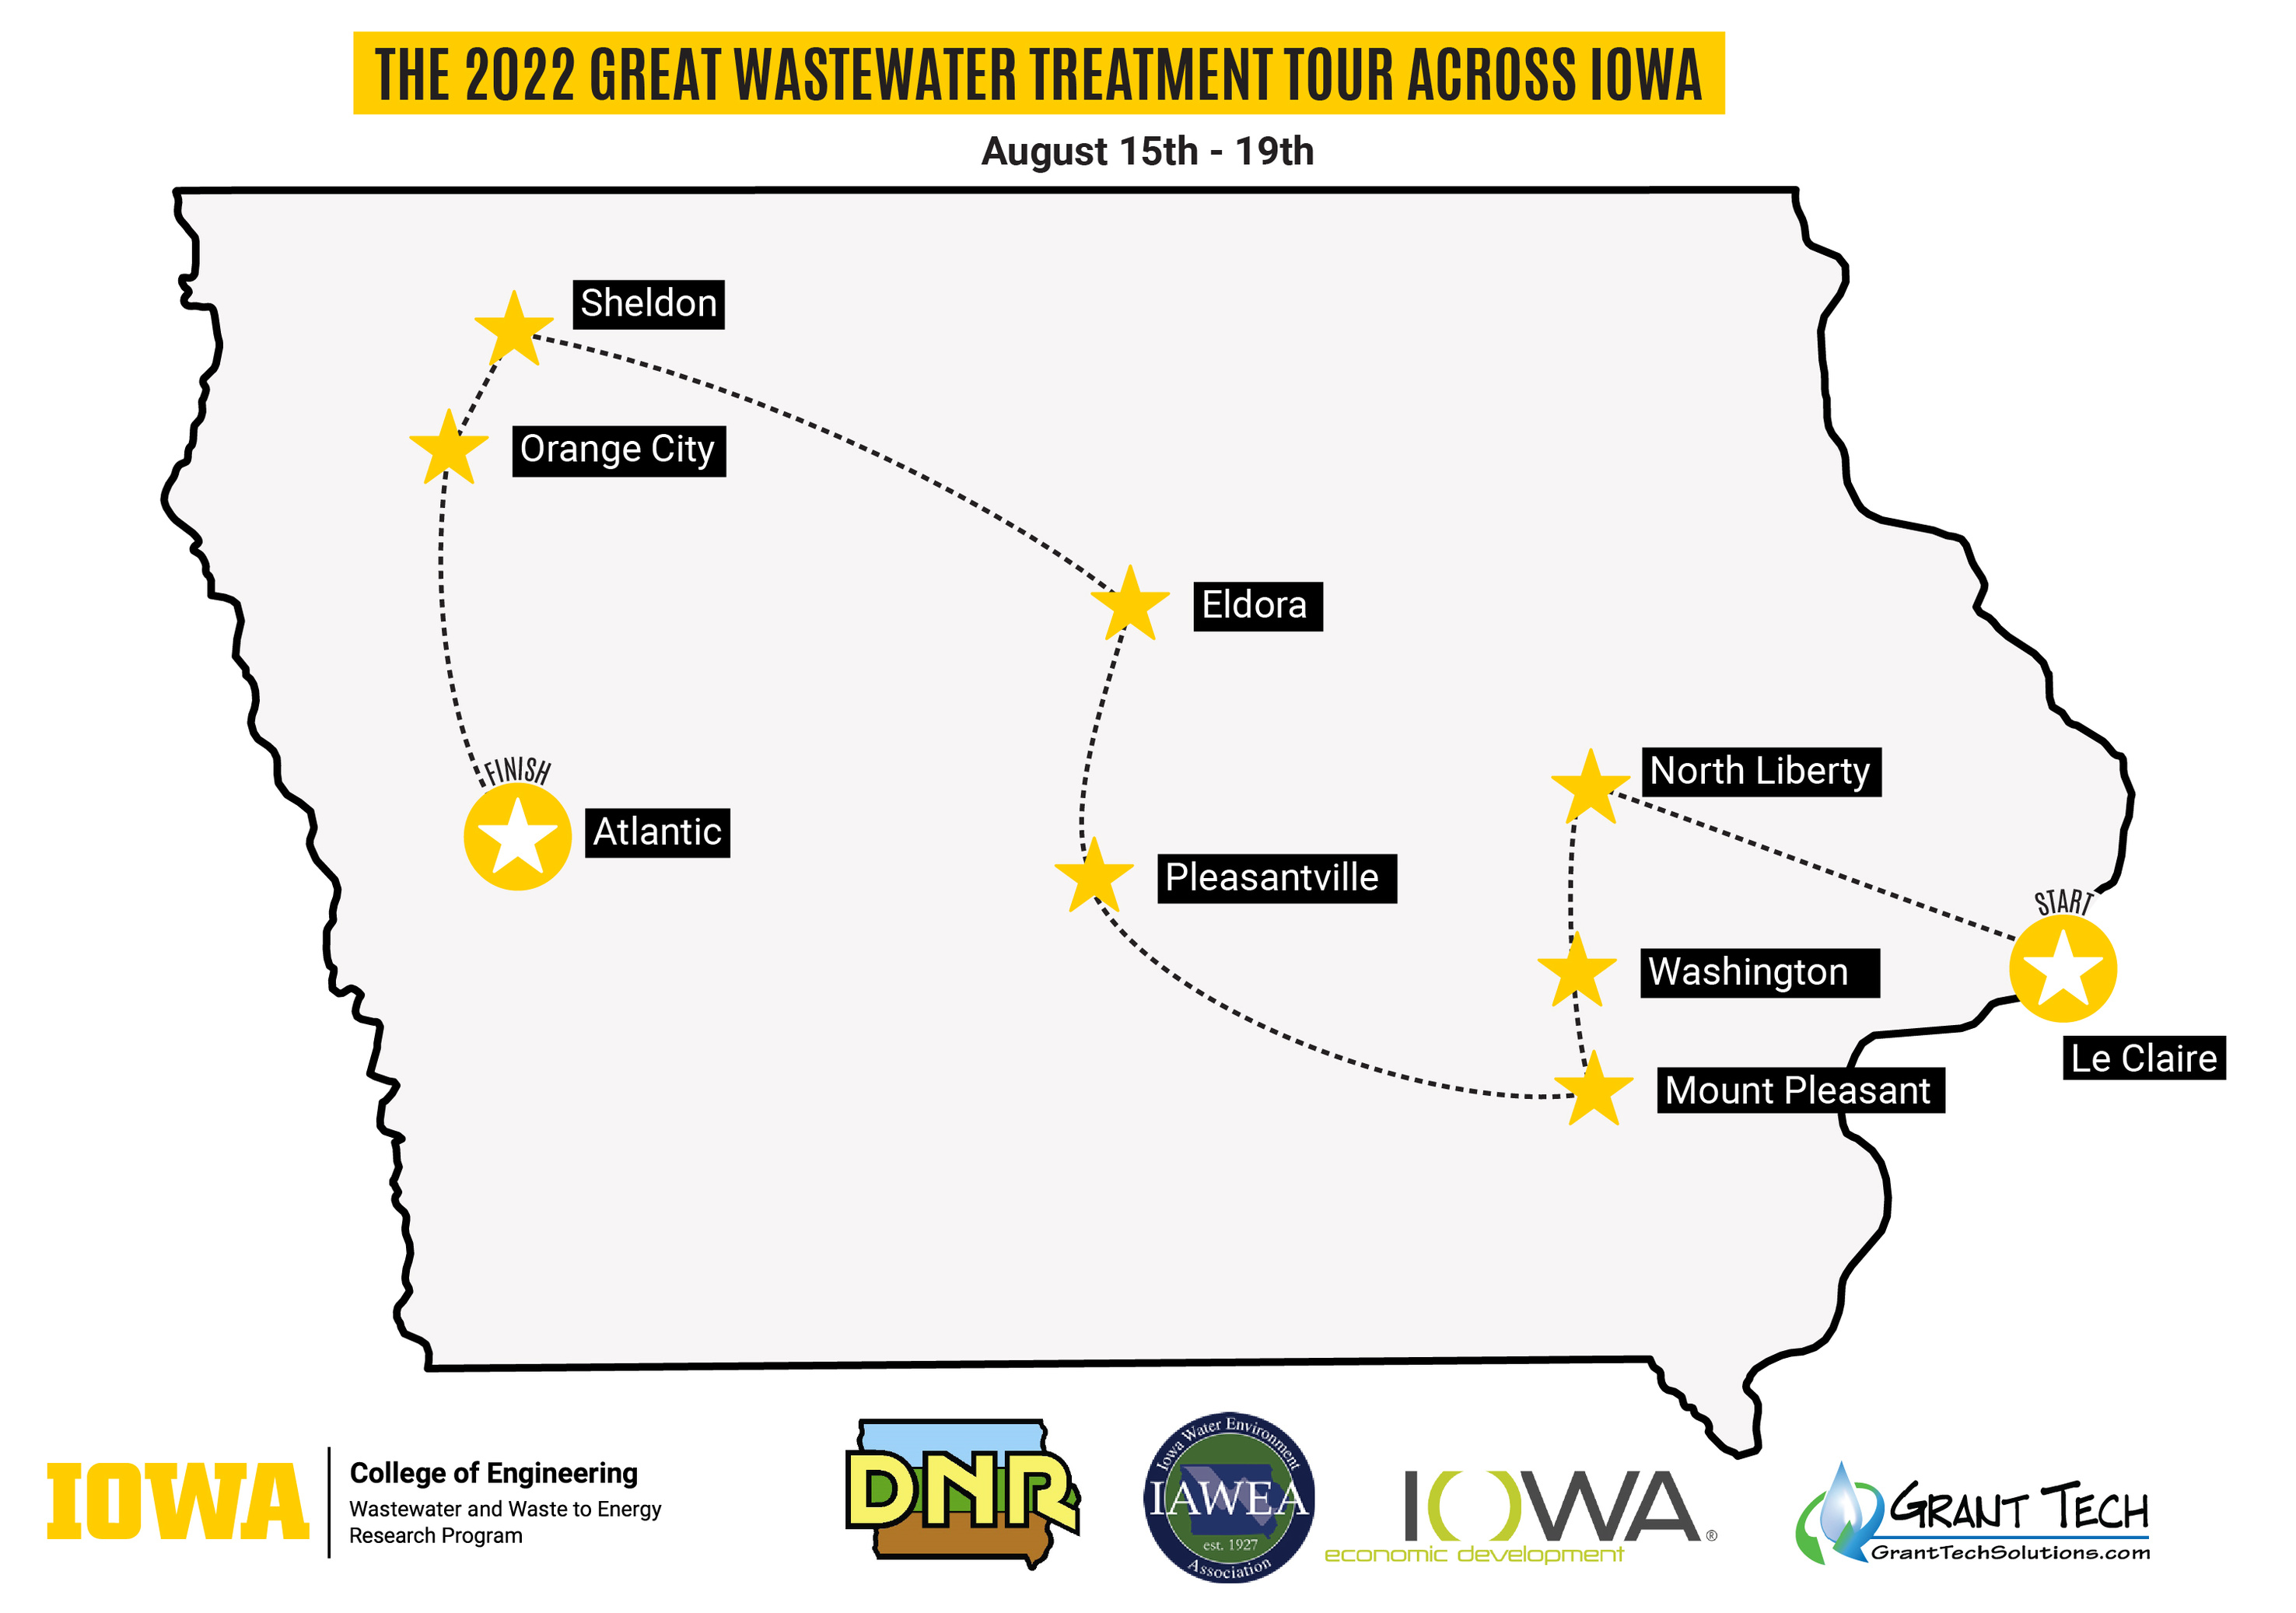 The Great Wastewater Treatment Tour Across Iowa 2022